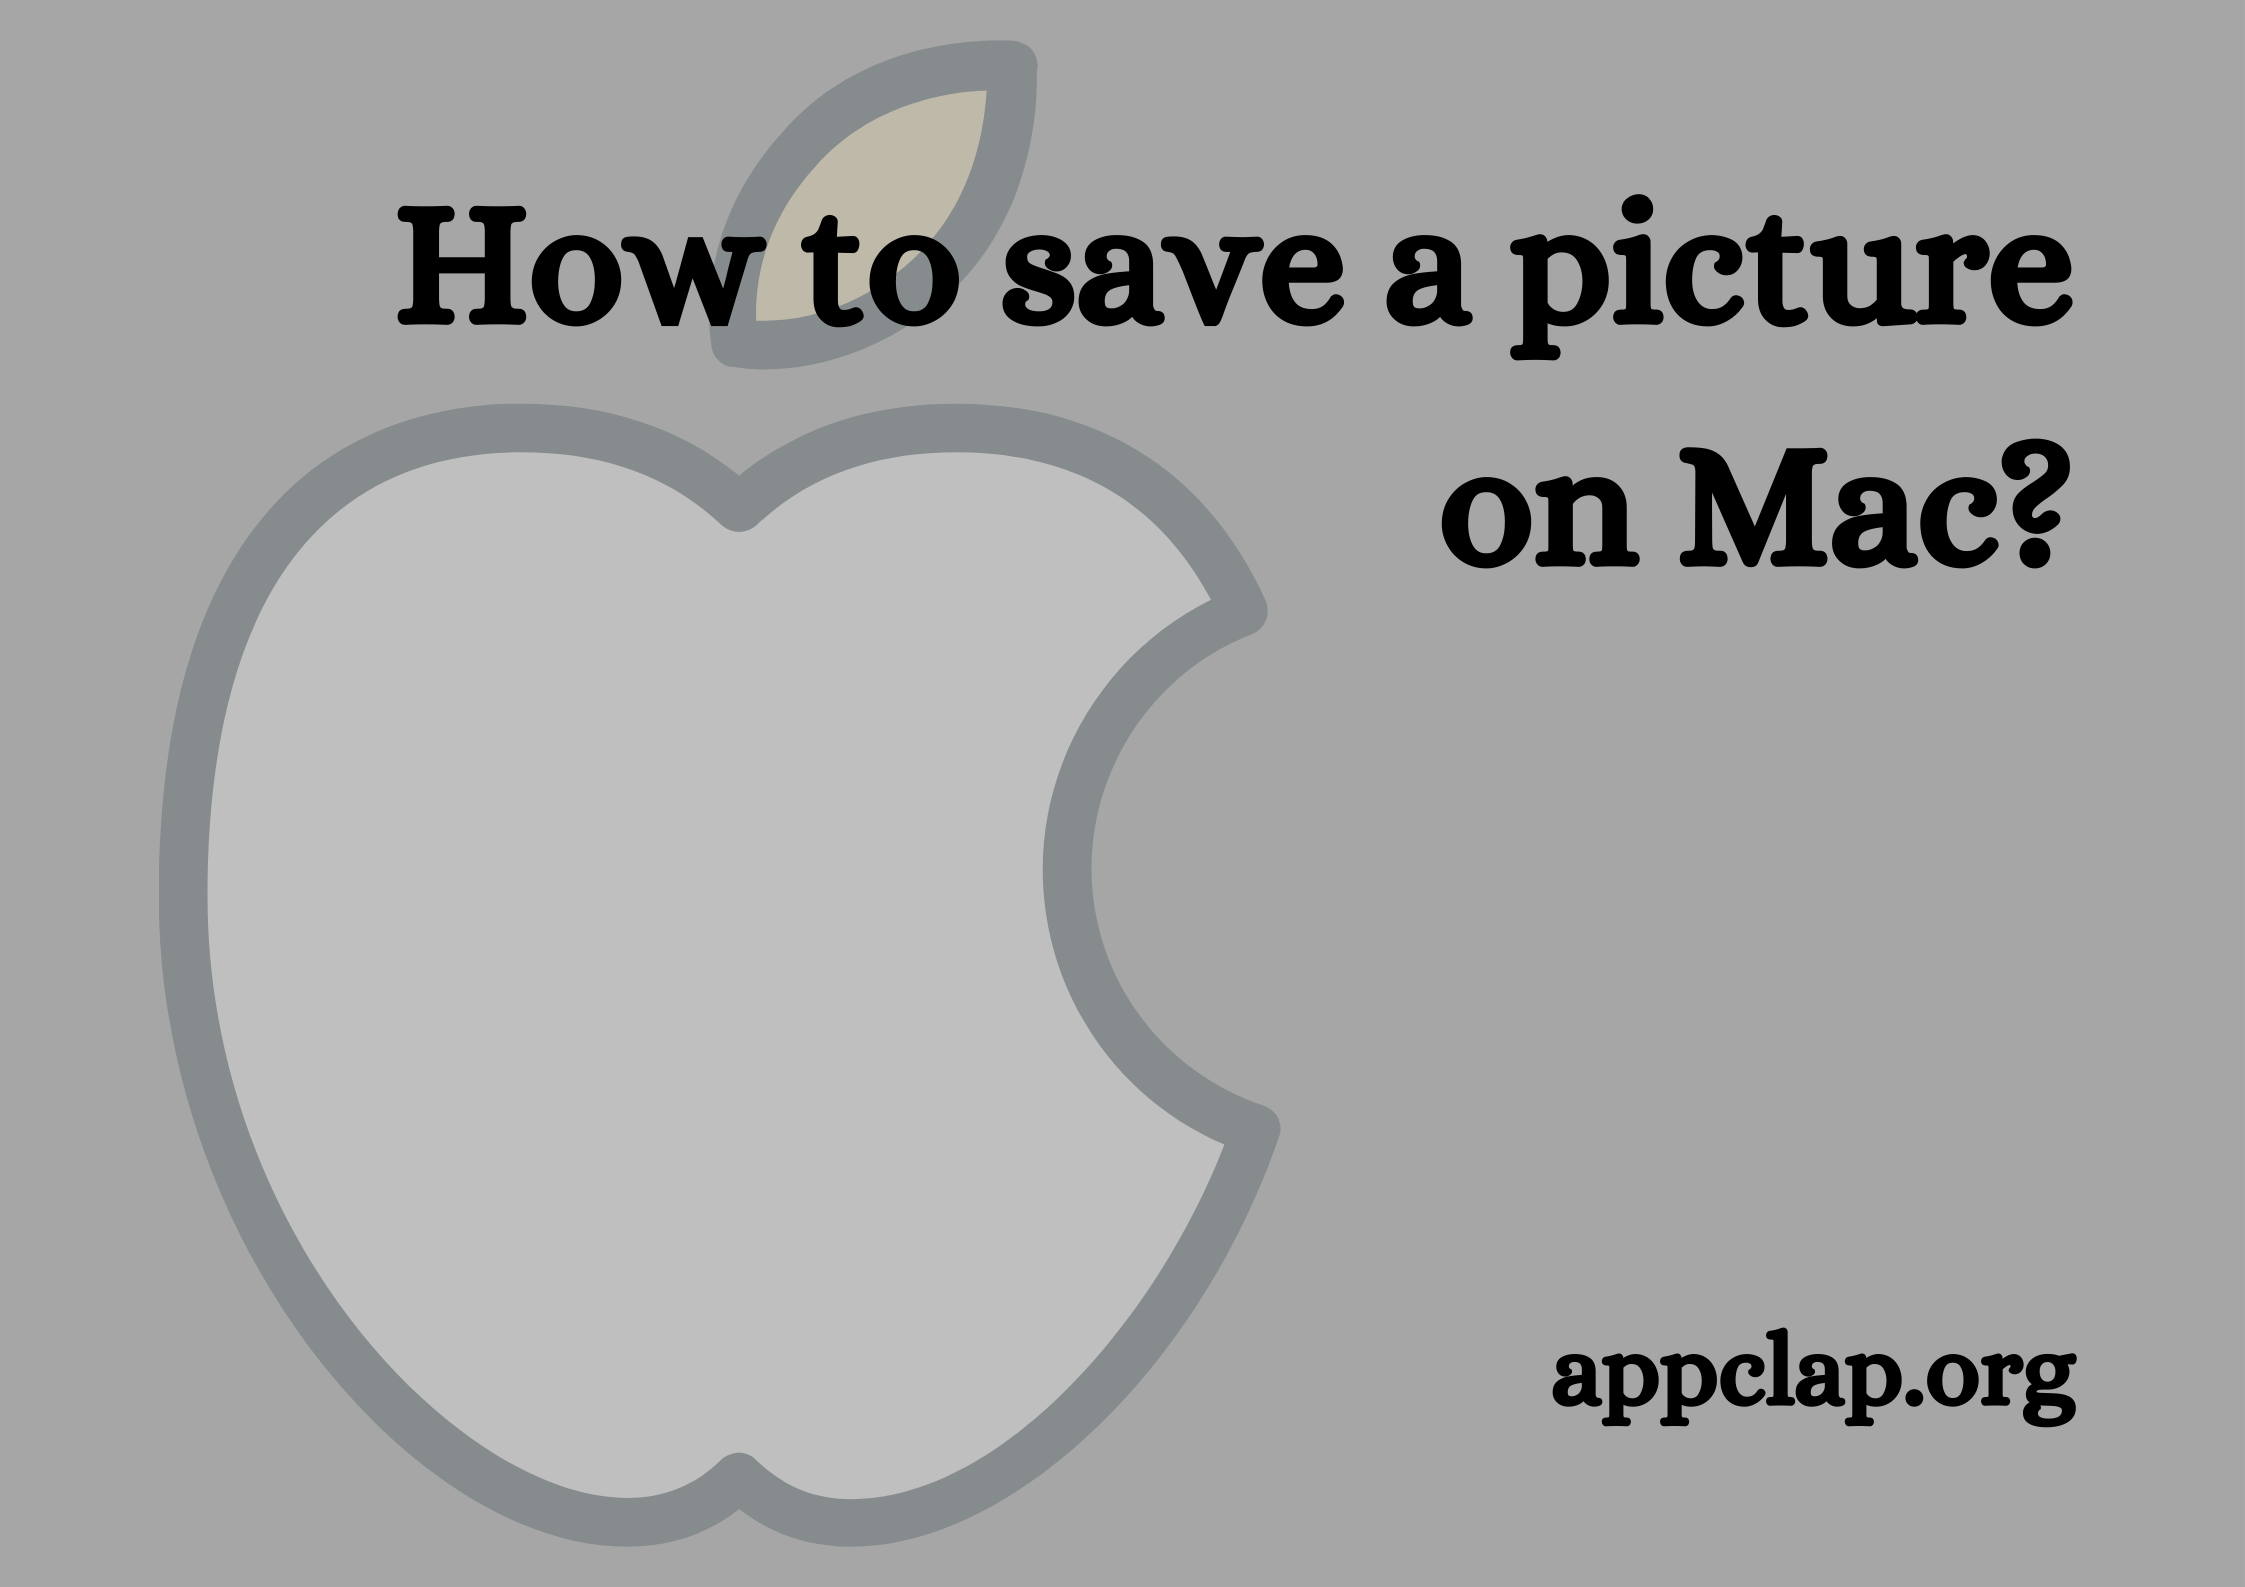 How to save a picture on Mac?